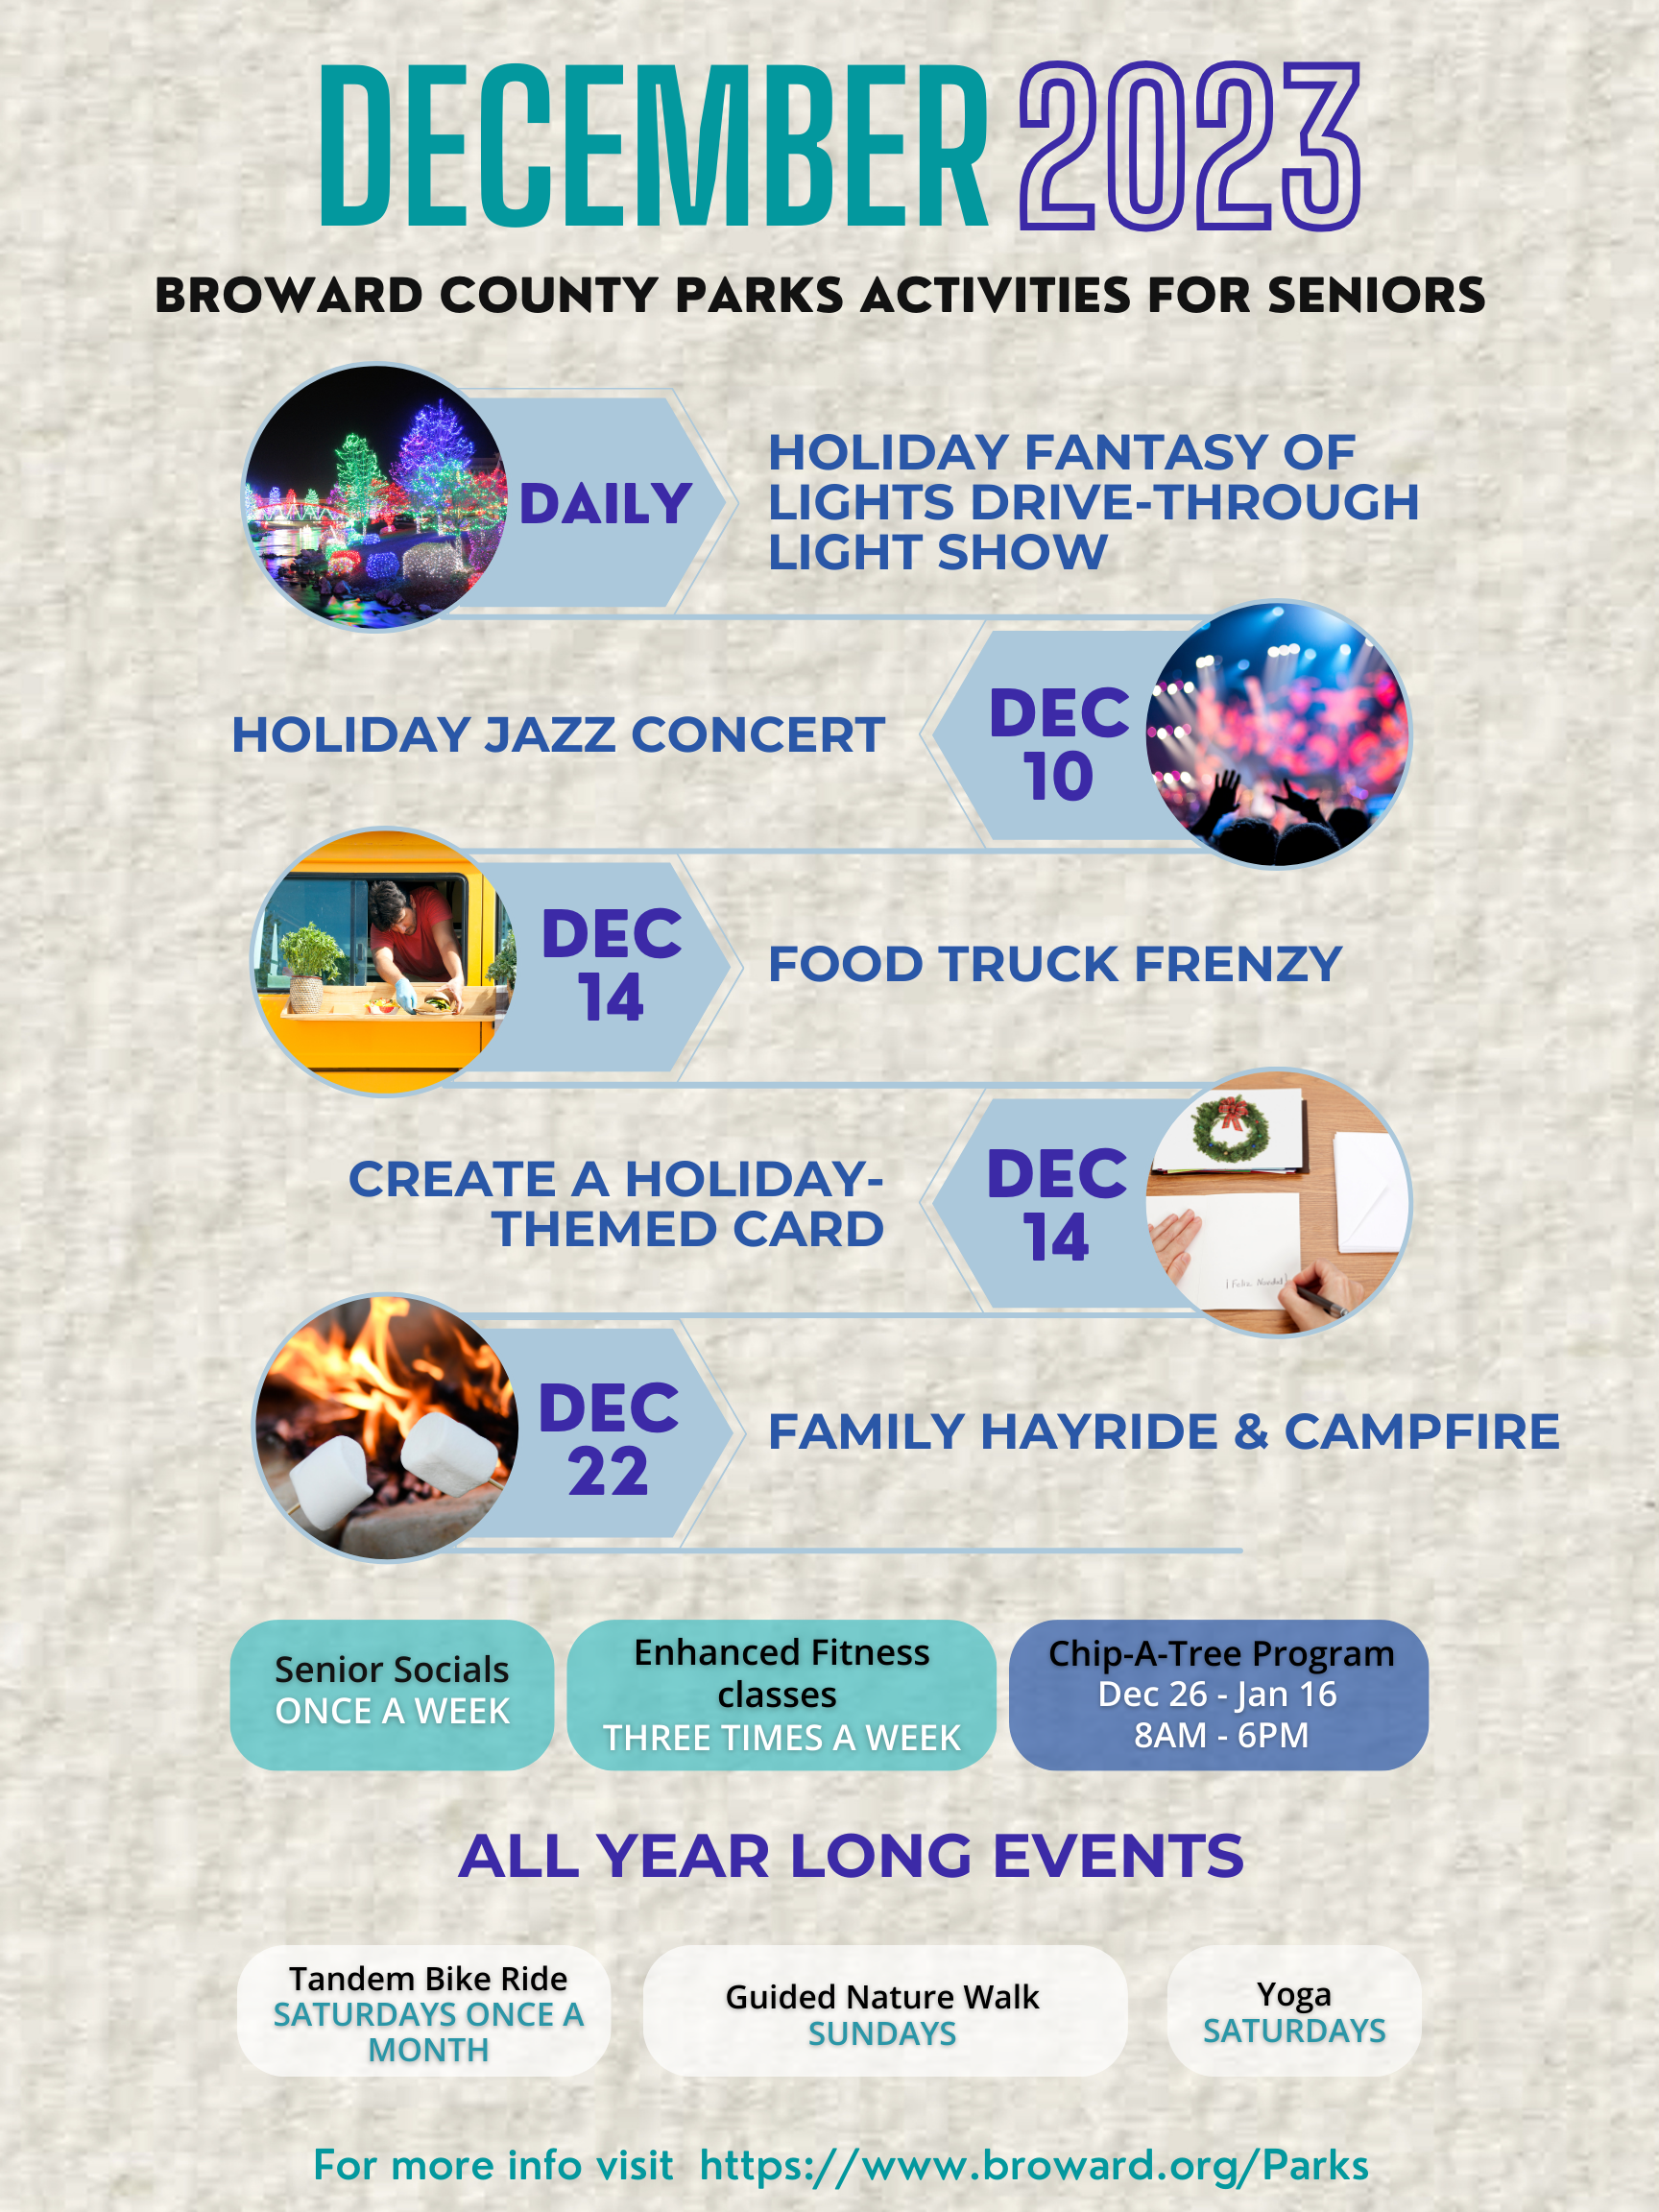 https://www.adrcbroward.org/sites/default/files/2023-12/2.1%20Events%20And%20Programs%20Schedule%20%2810%29.png